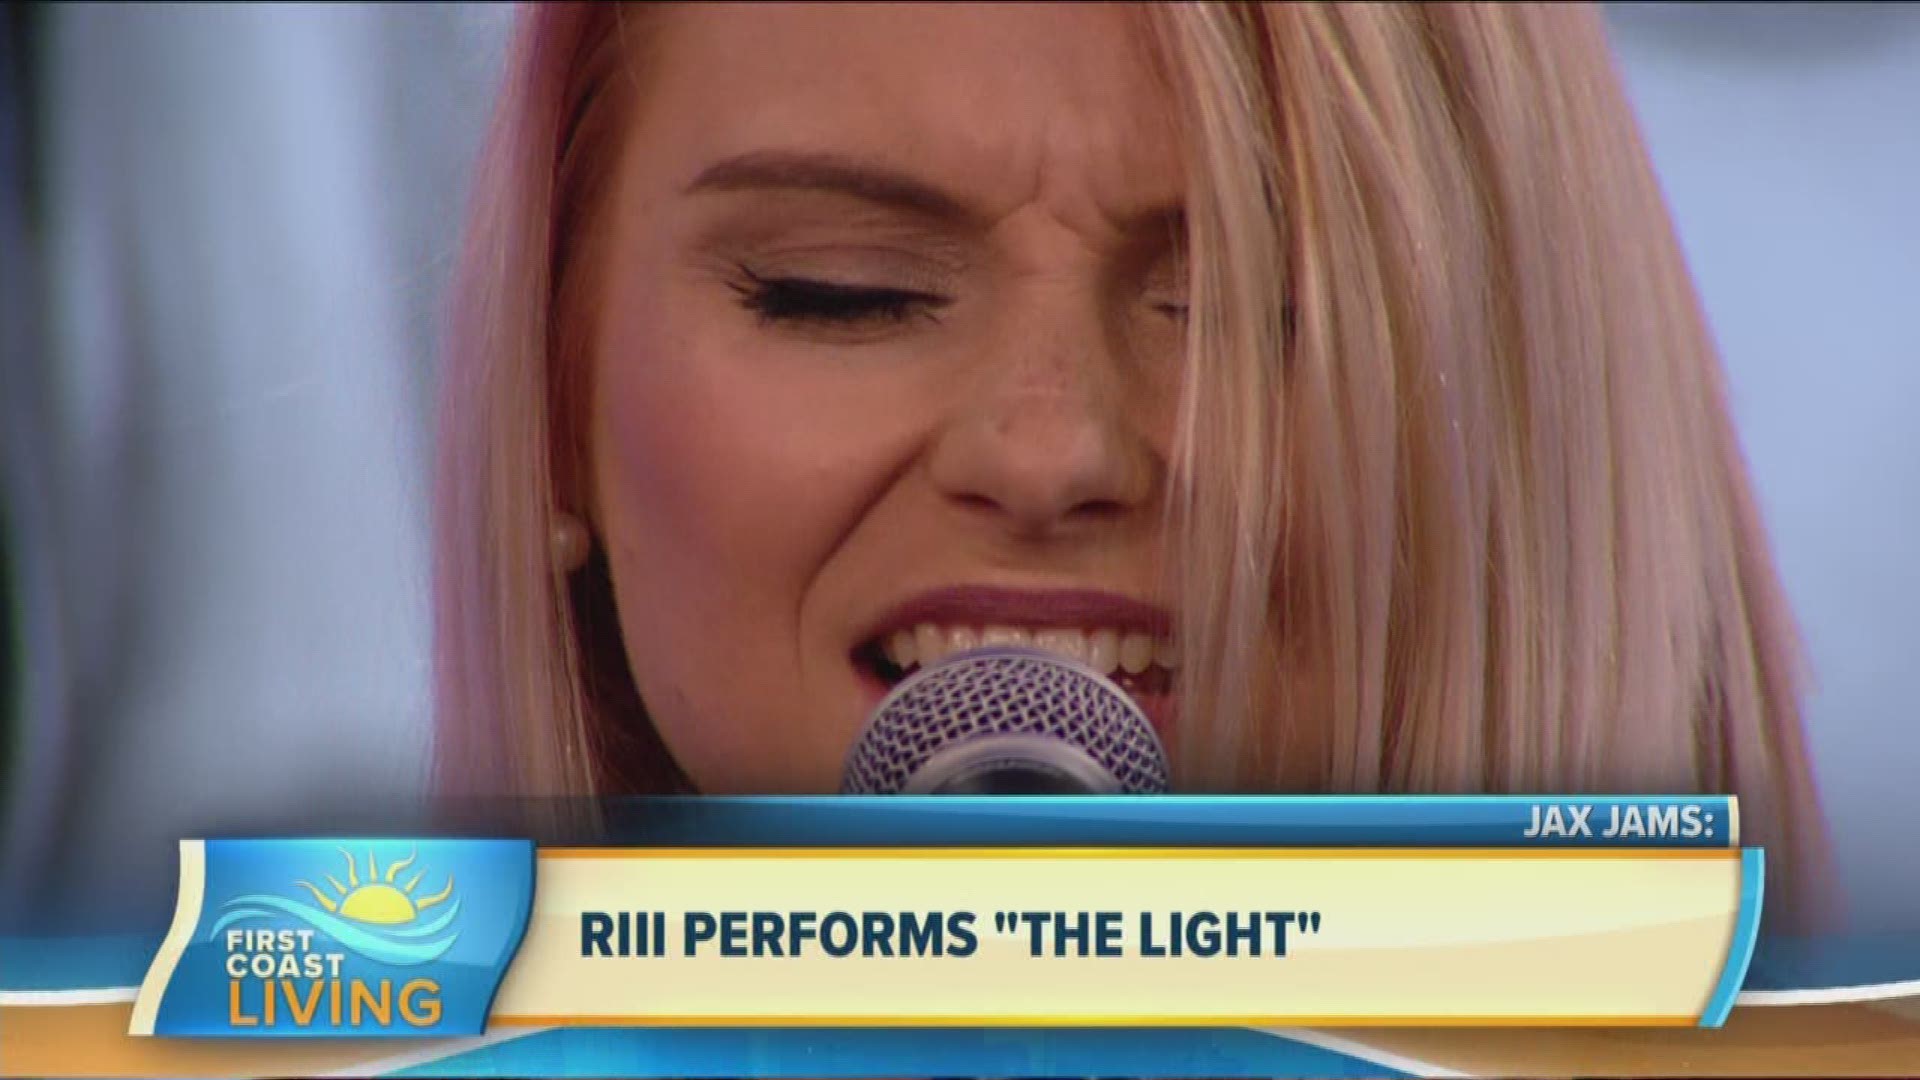 Local singer and songwriter Riii performs her newest song "The Light"